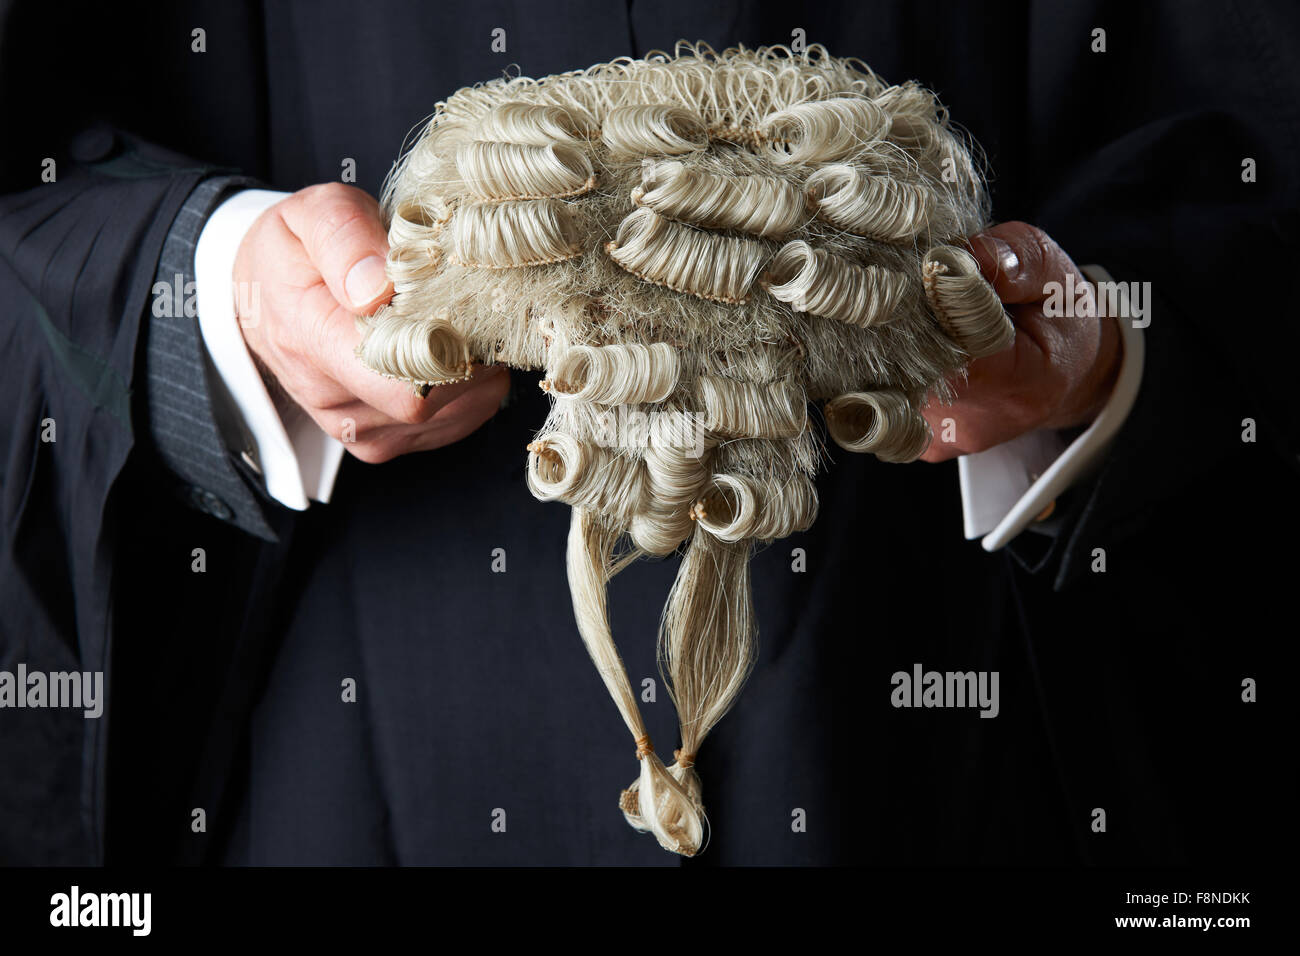 Barrister Holding Wig Stock Photo